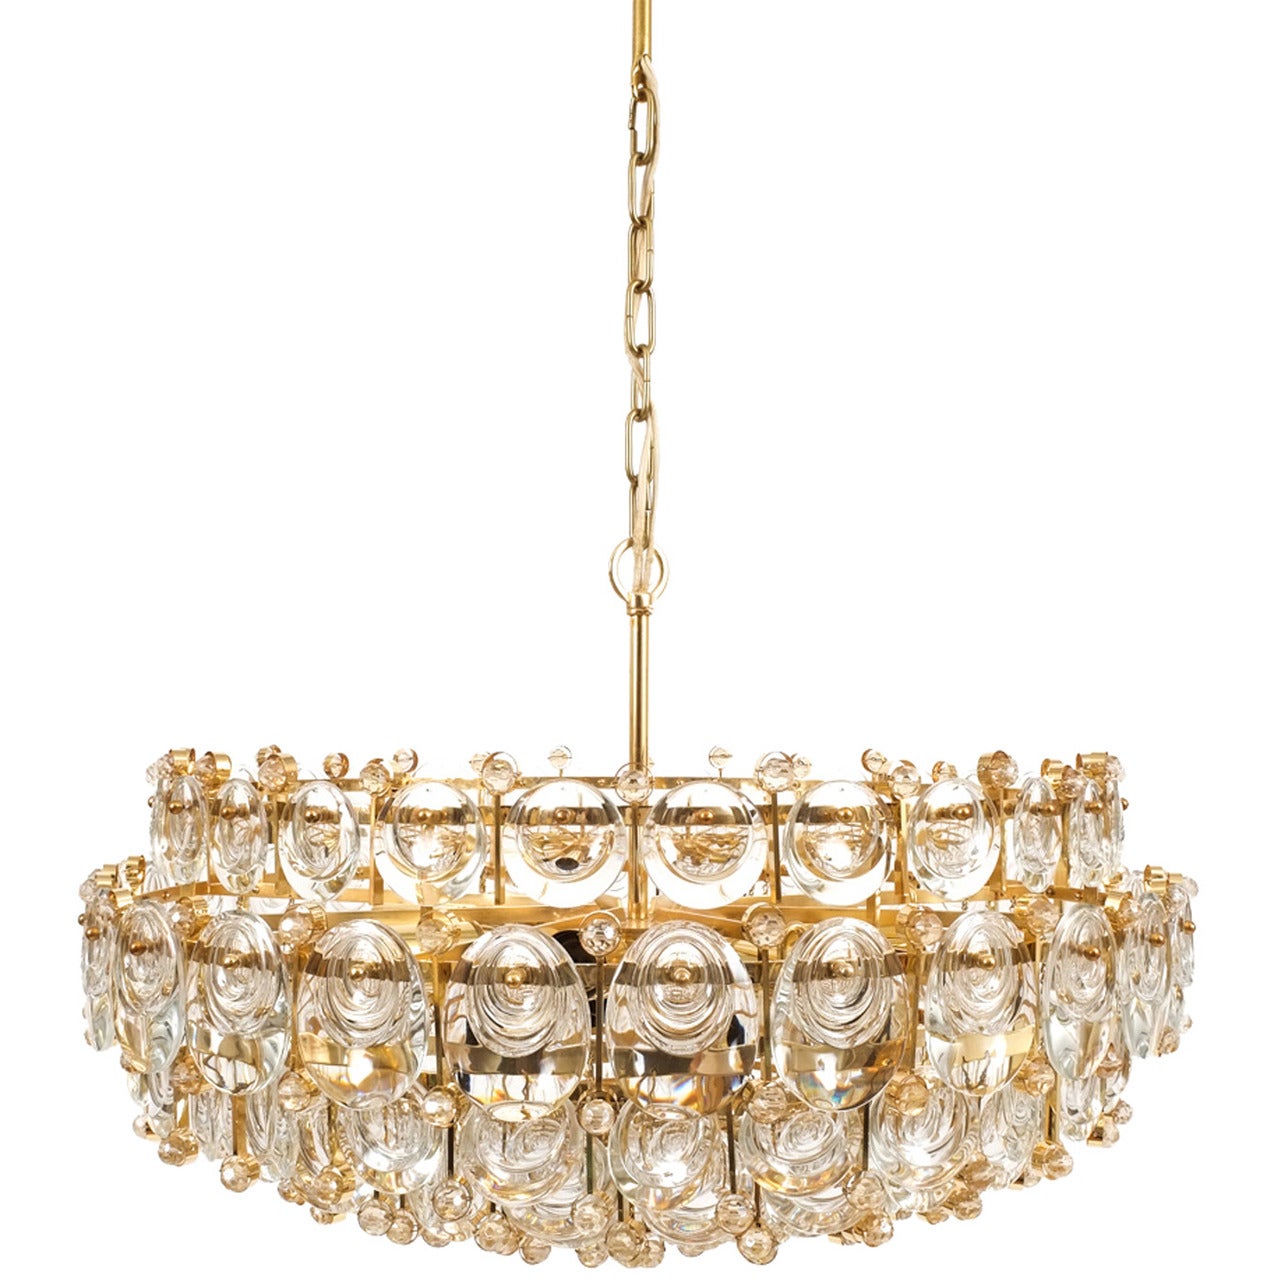 Exceptional Large Gilt Brass and Glass Chandelier Lamp, Palwa circa 1960